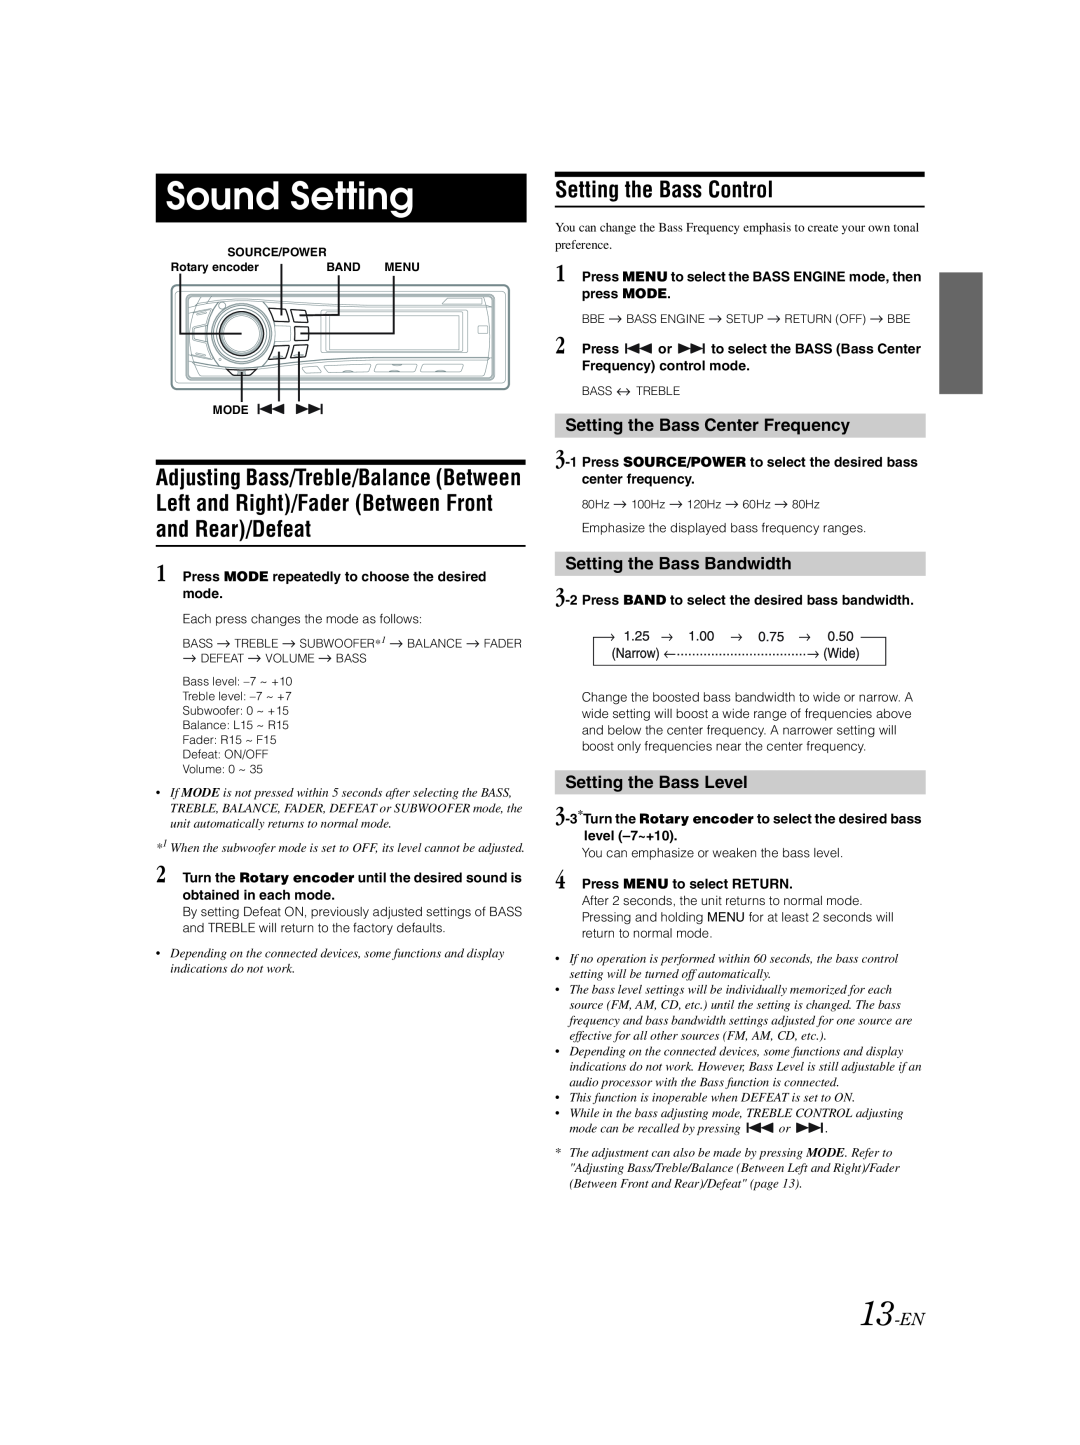 Alpine CDA-9857 Sound Setting, Left and Right/Fader Between Front, and Rear/Defeat, Setting the Bass Control, 13-EN 